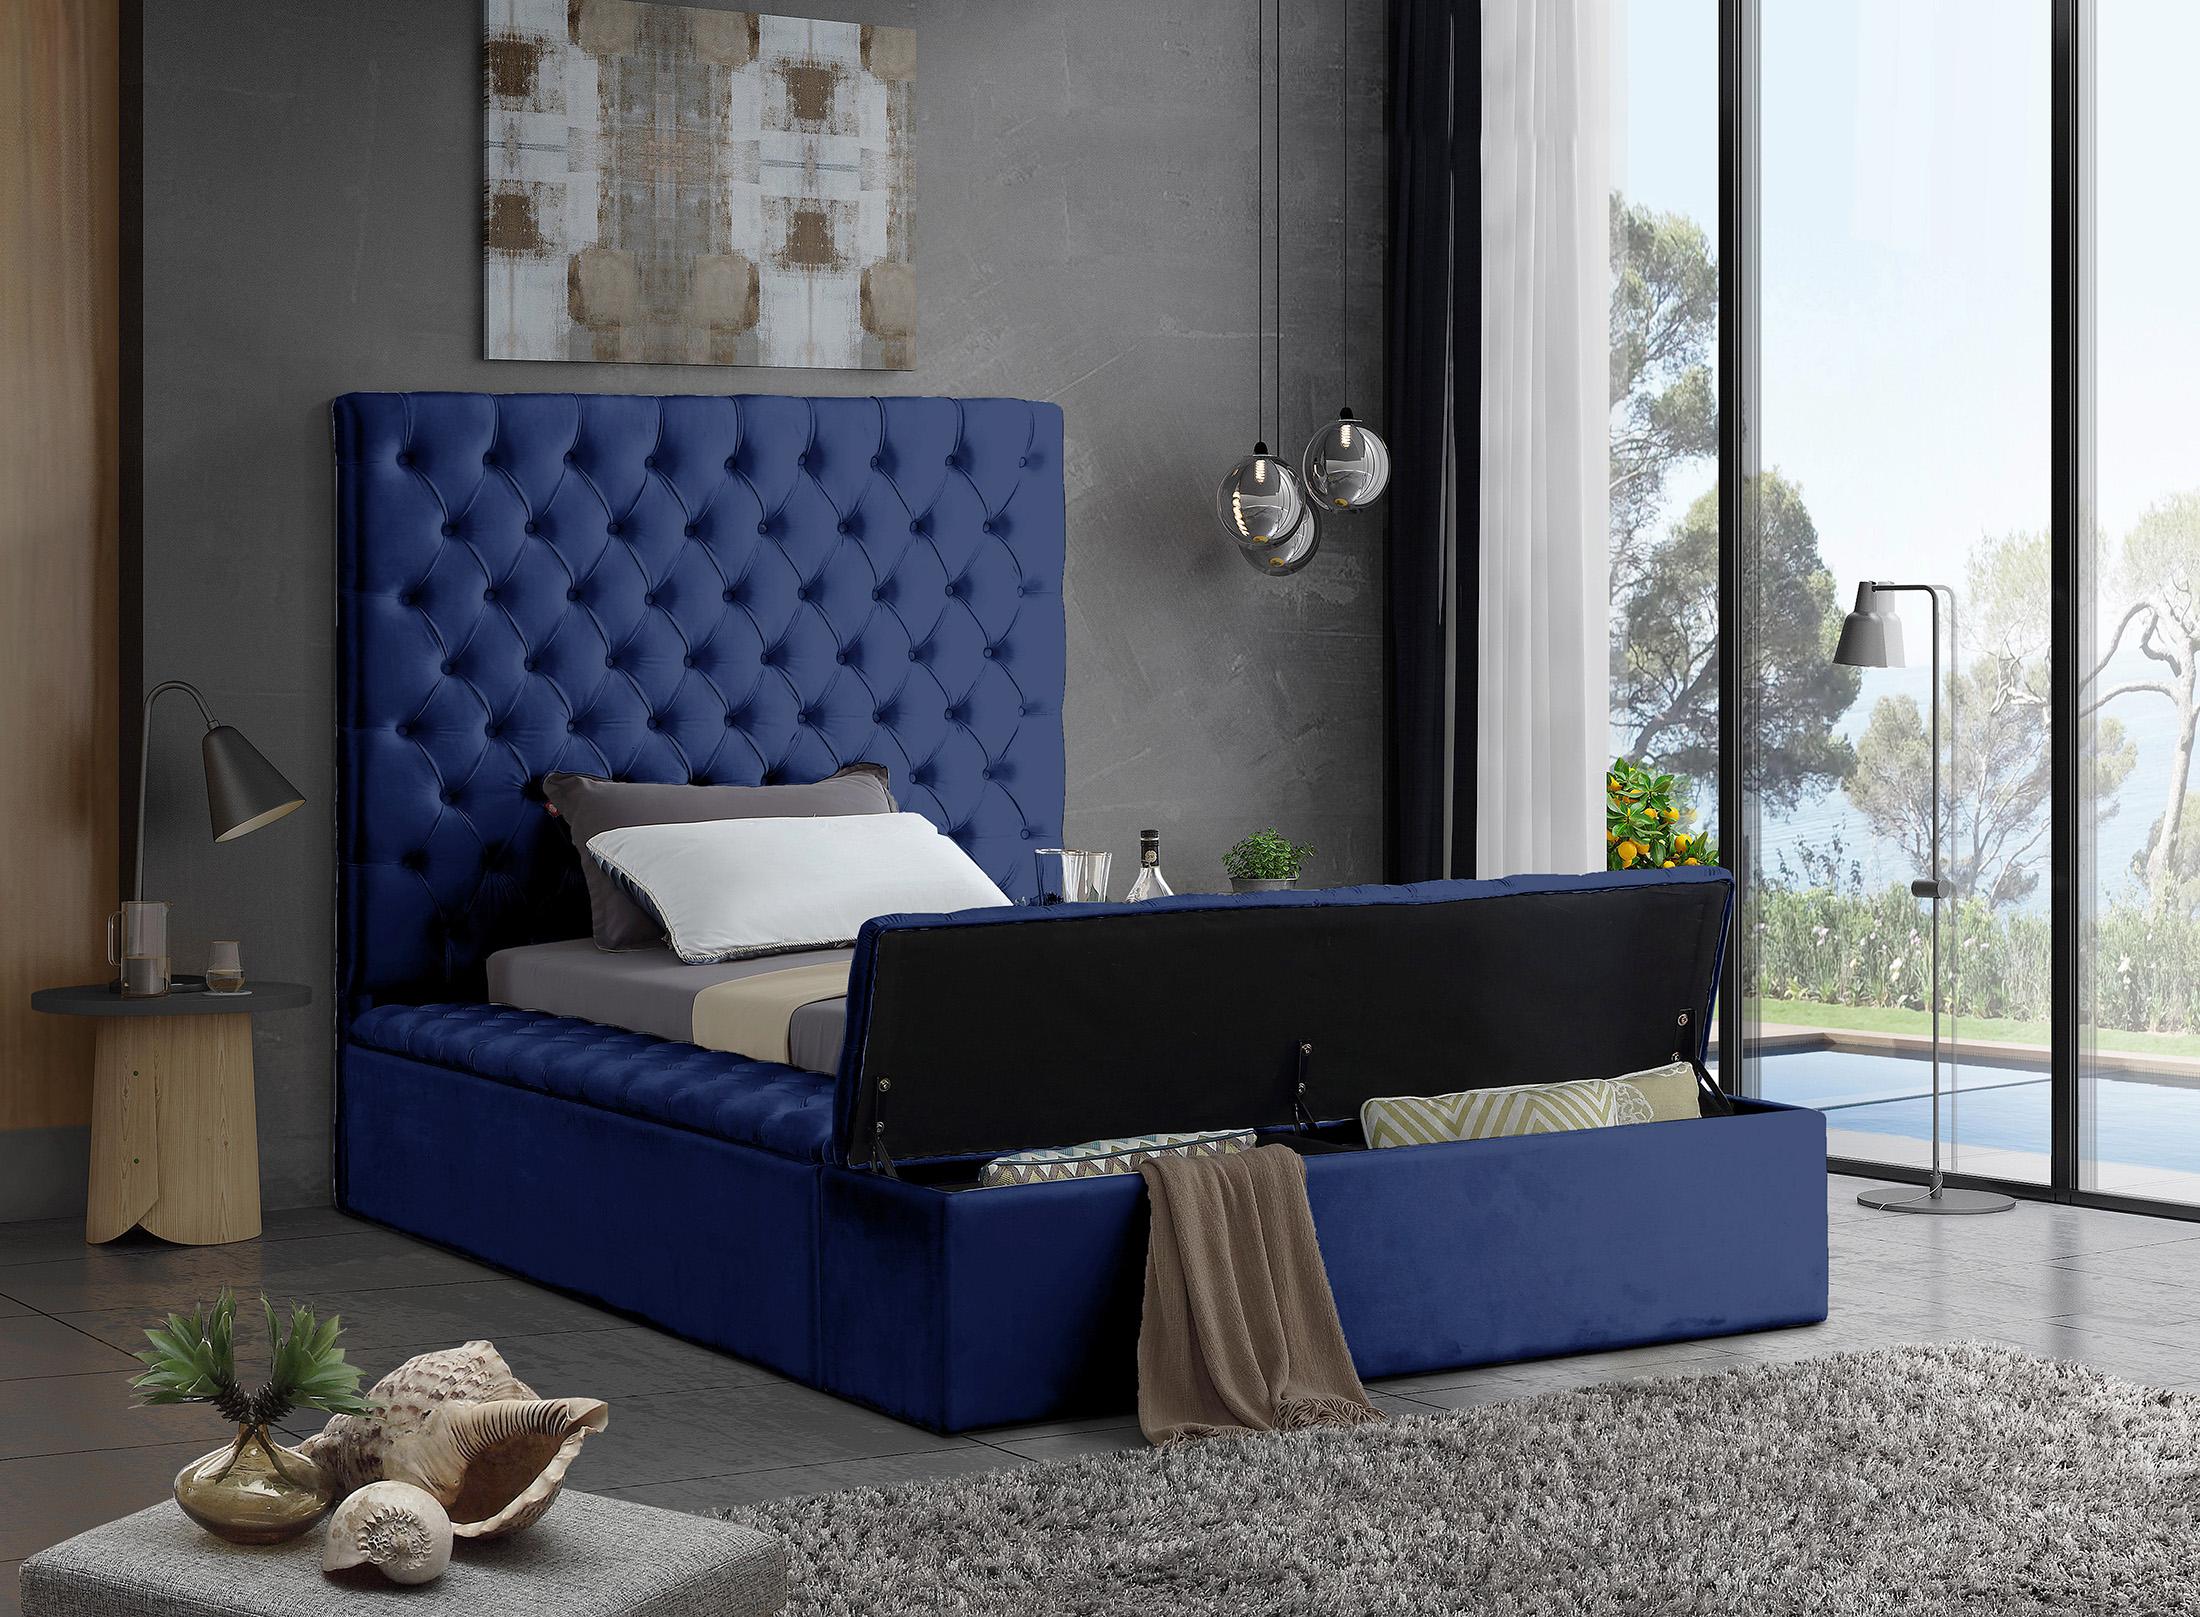 

    
Meridian Furniture BLISS Navy-T Storage Bed Navy blue BlissNavy-T
